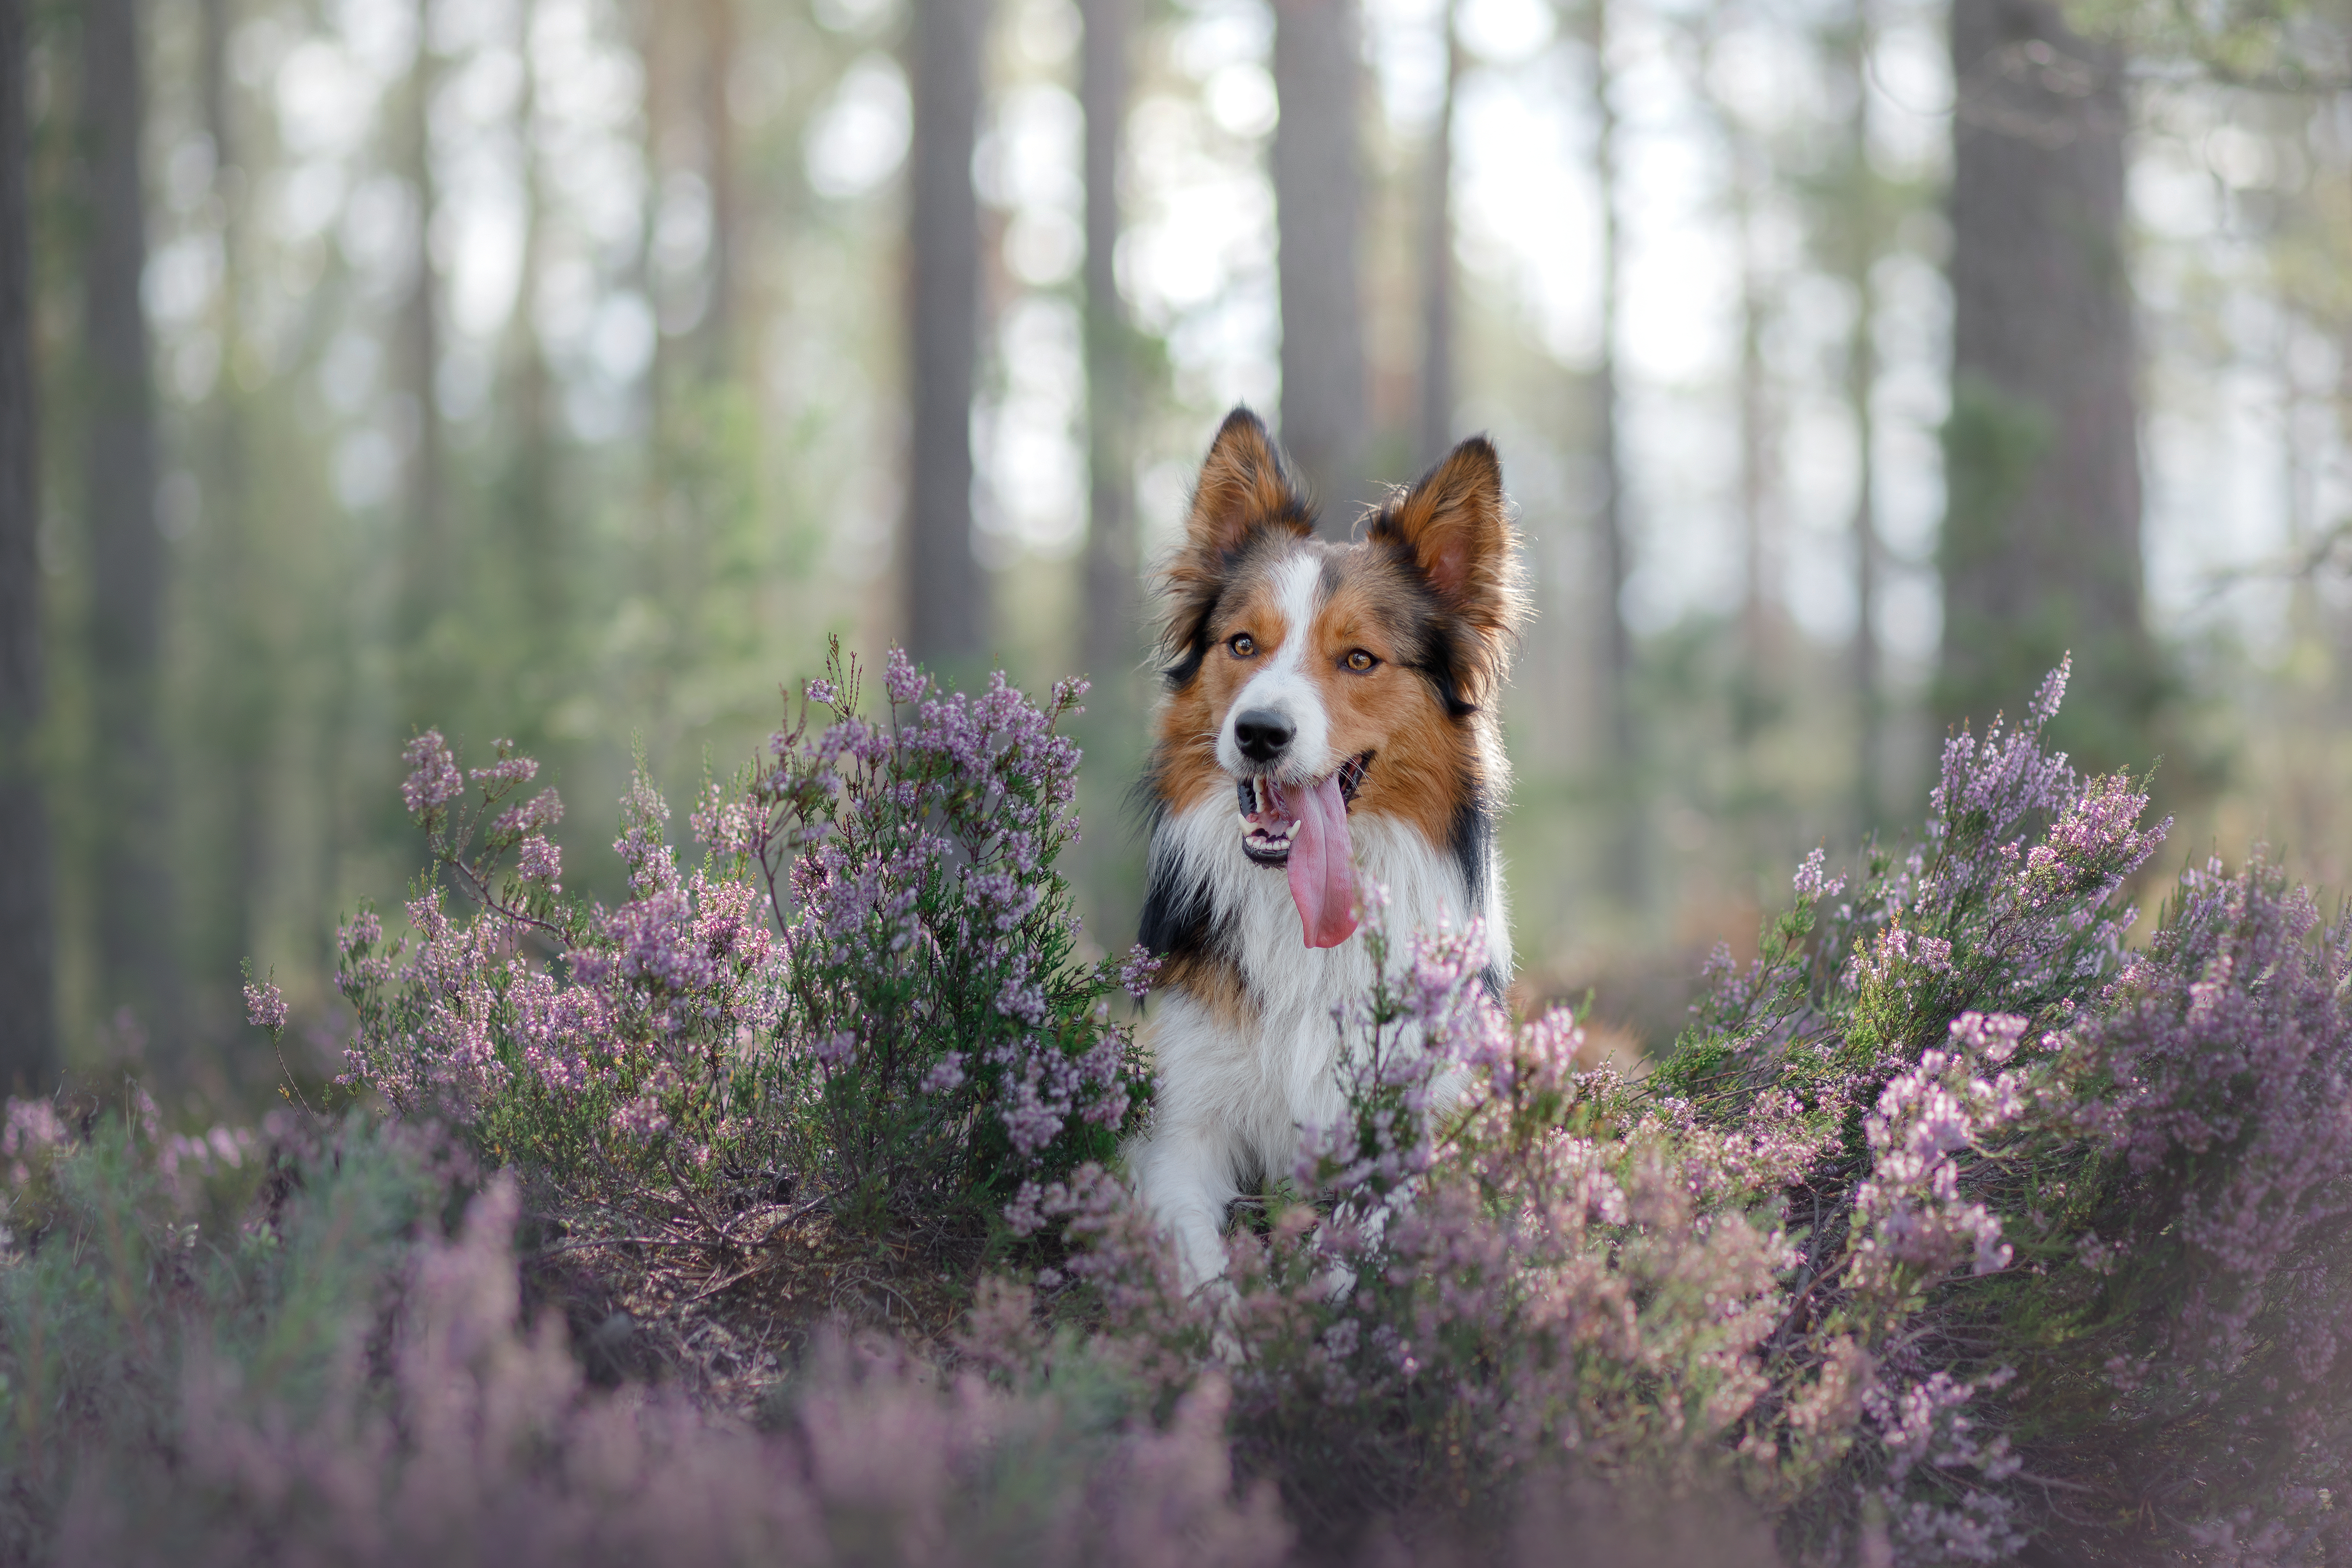 Playful dog in nature